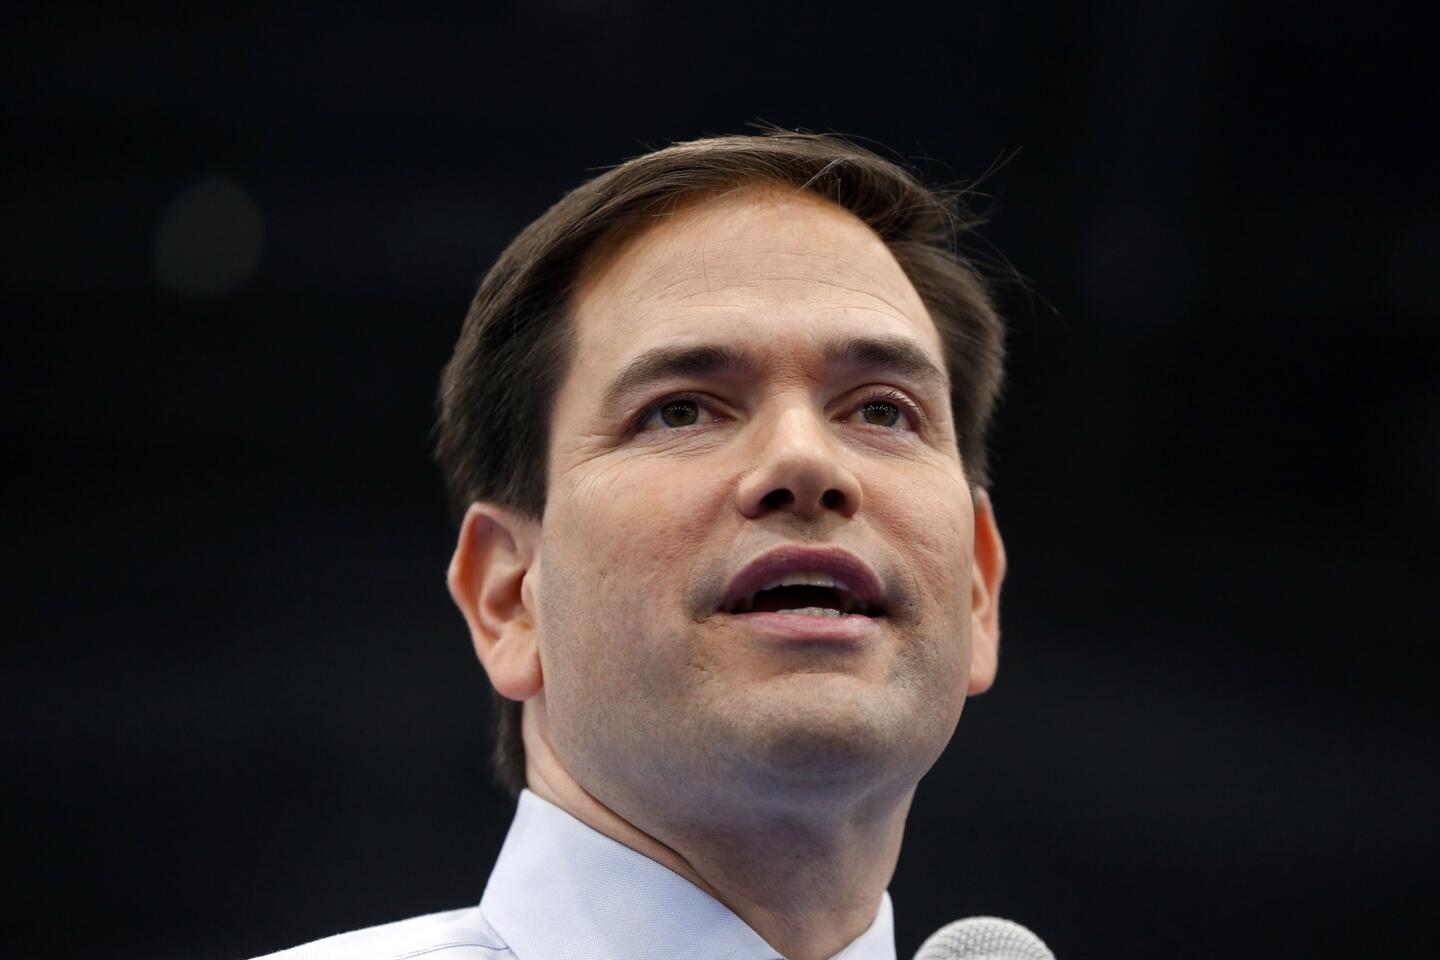 Florida Sen. Marco Rubio has declined to withdraw his criticism of Donald T